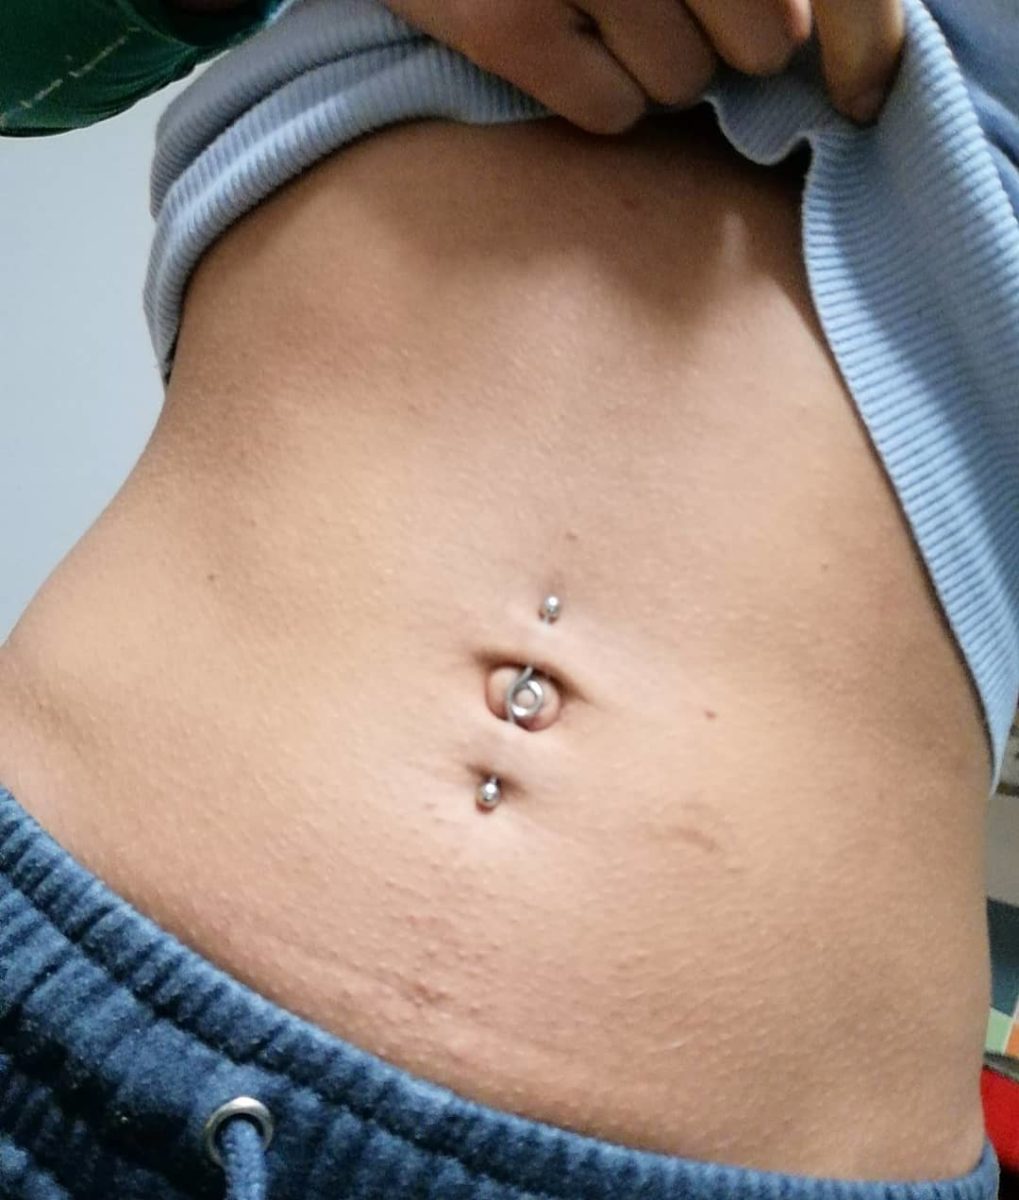 crazy belly button piercings